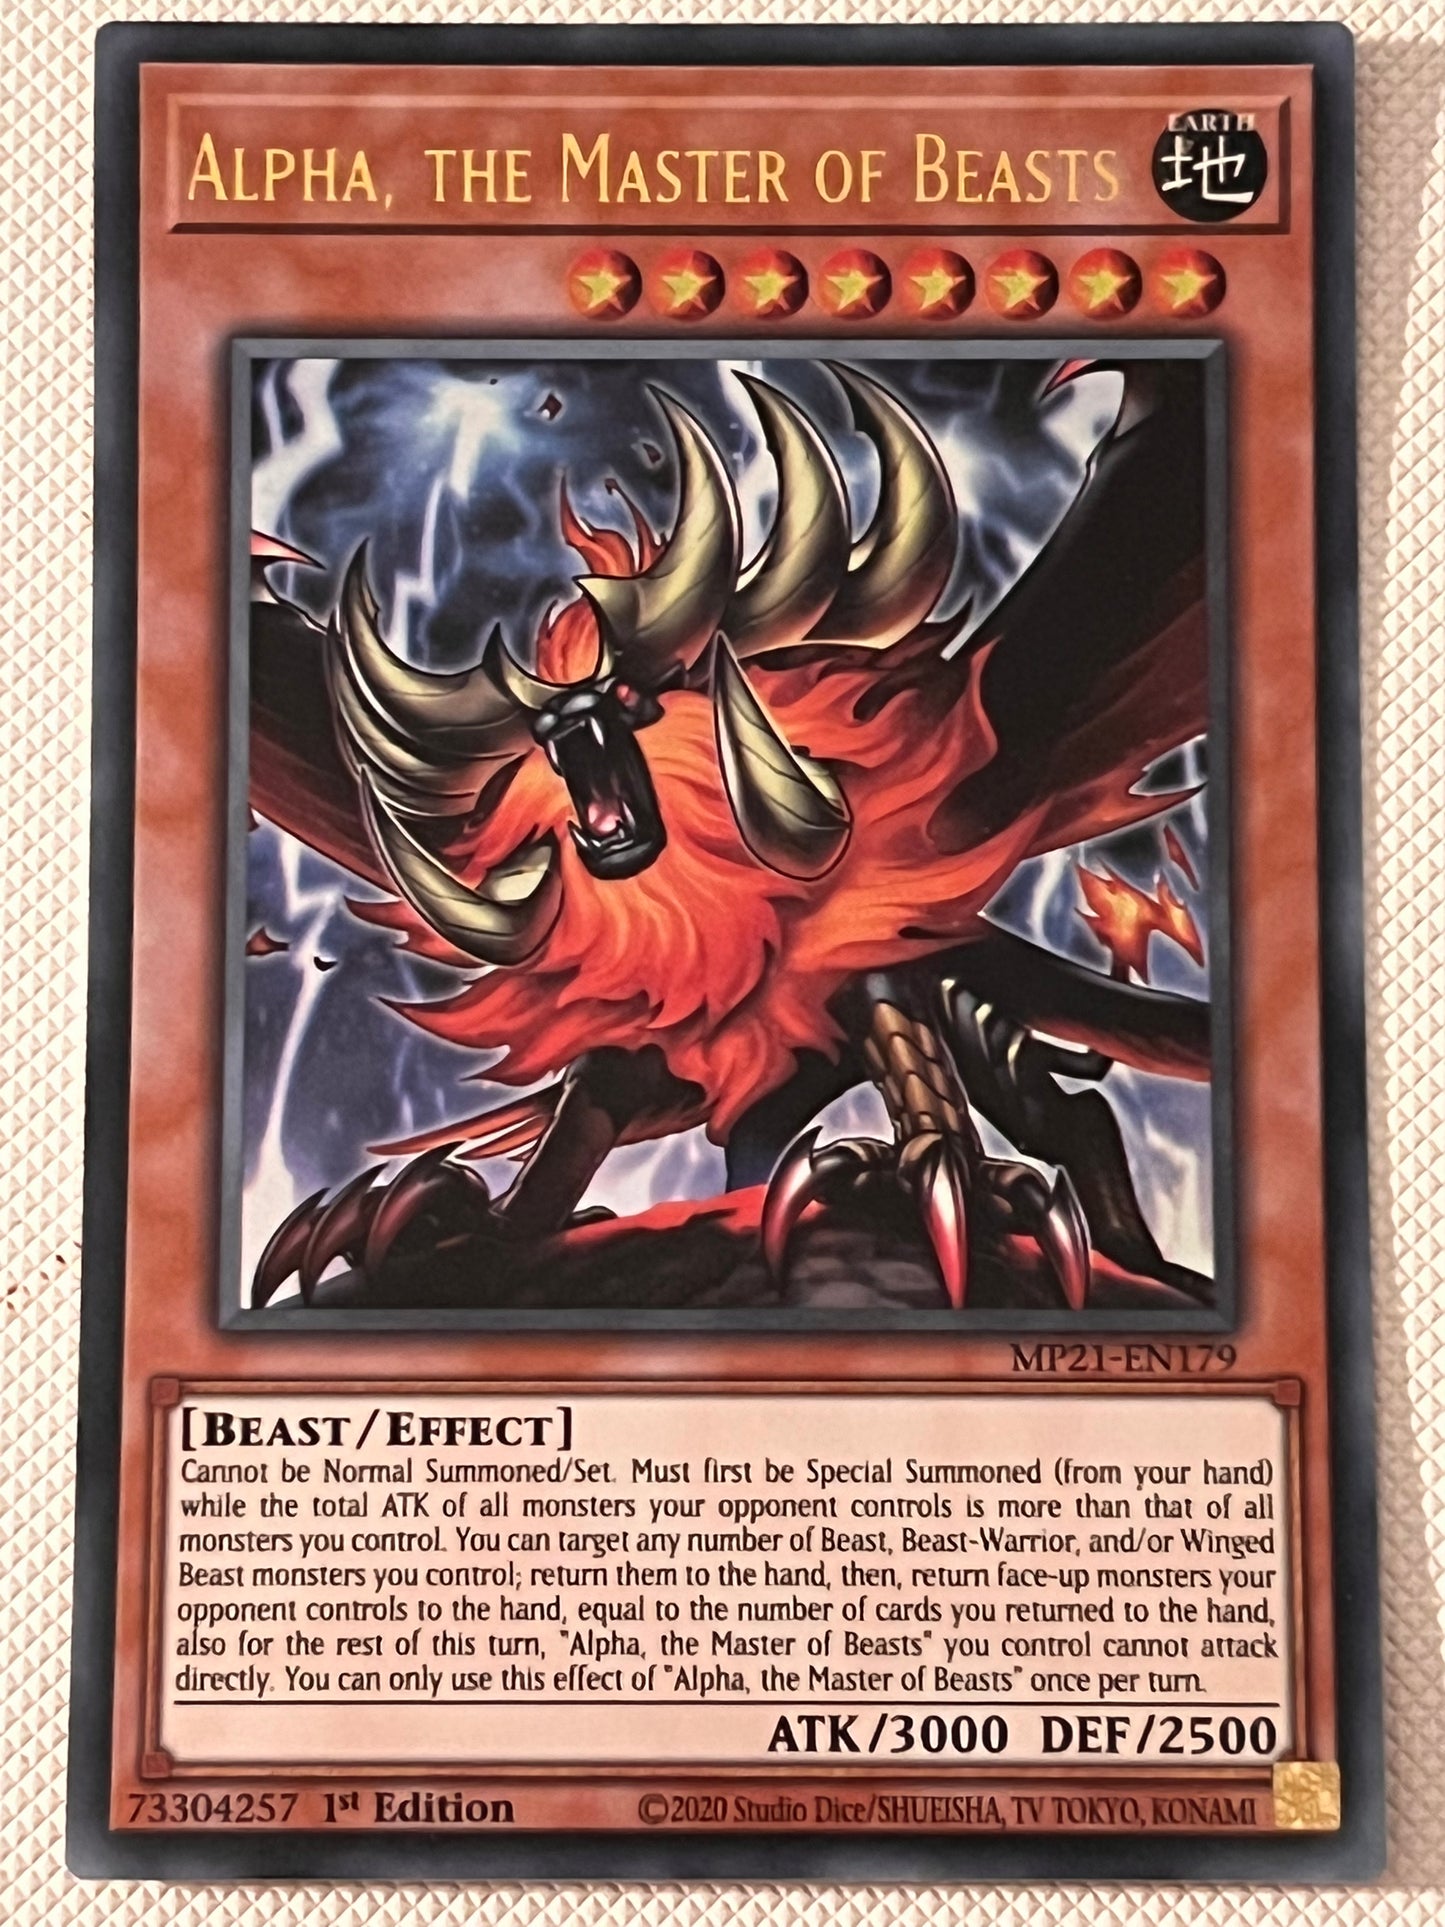 Alpha, The Master Of Beasts MP21-EN179